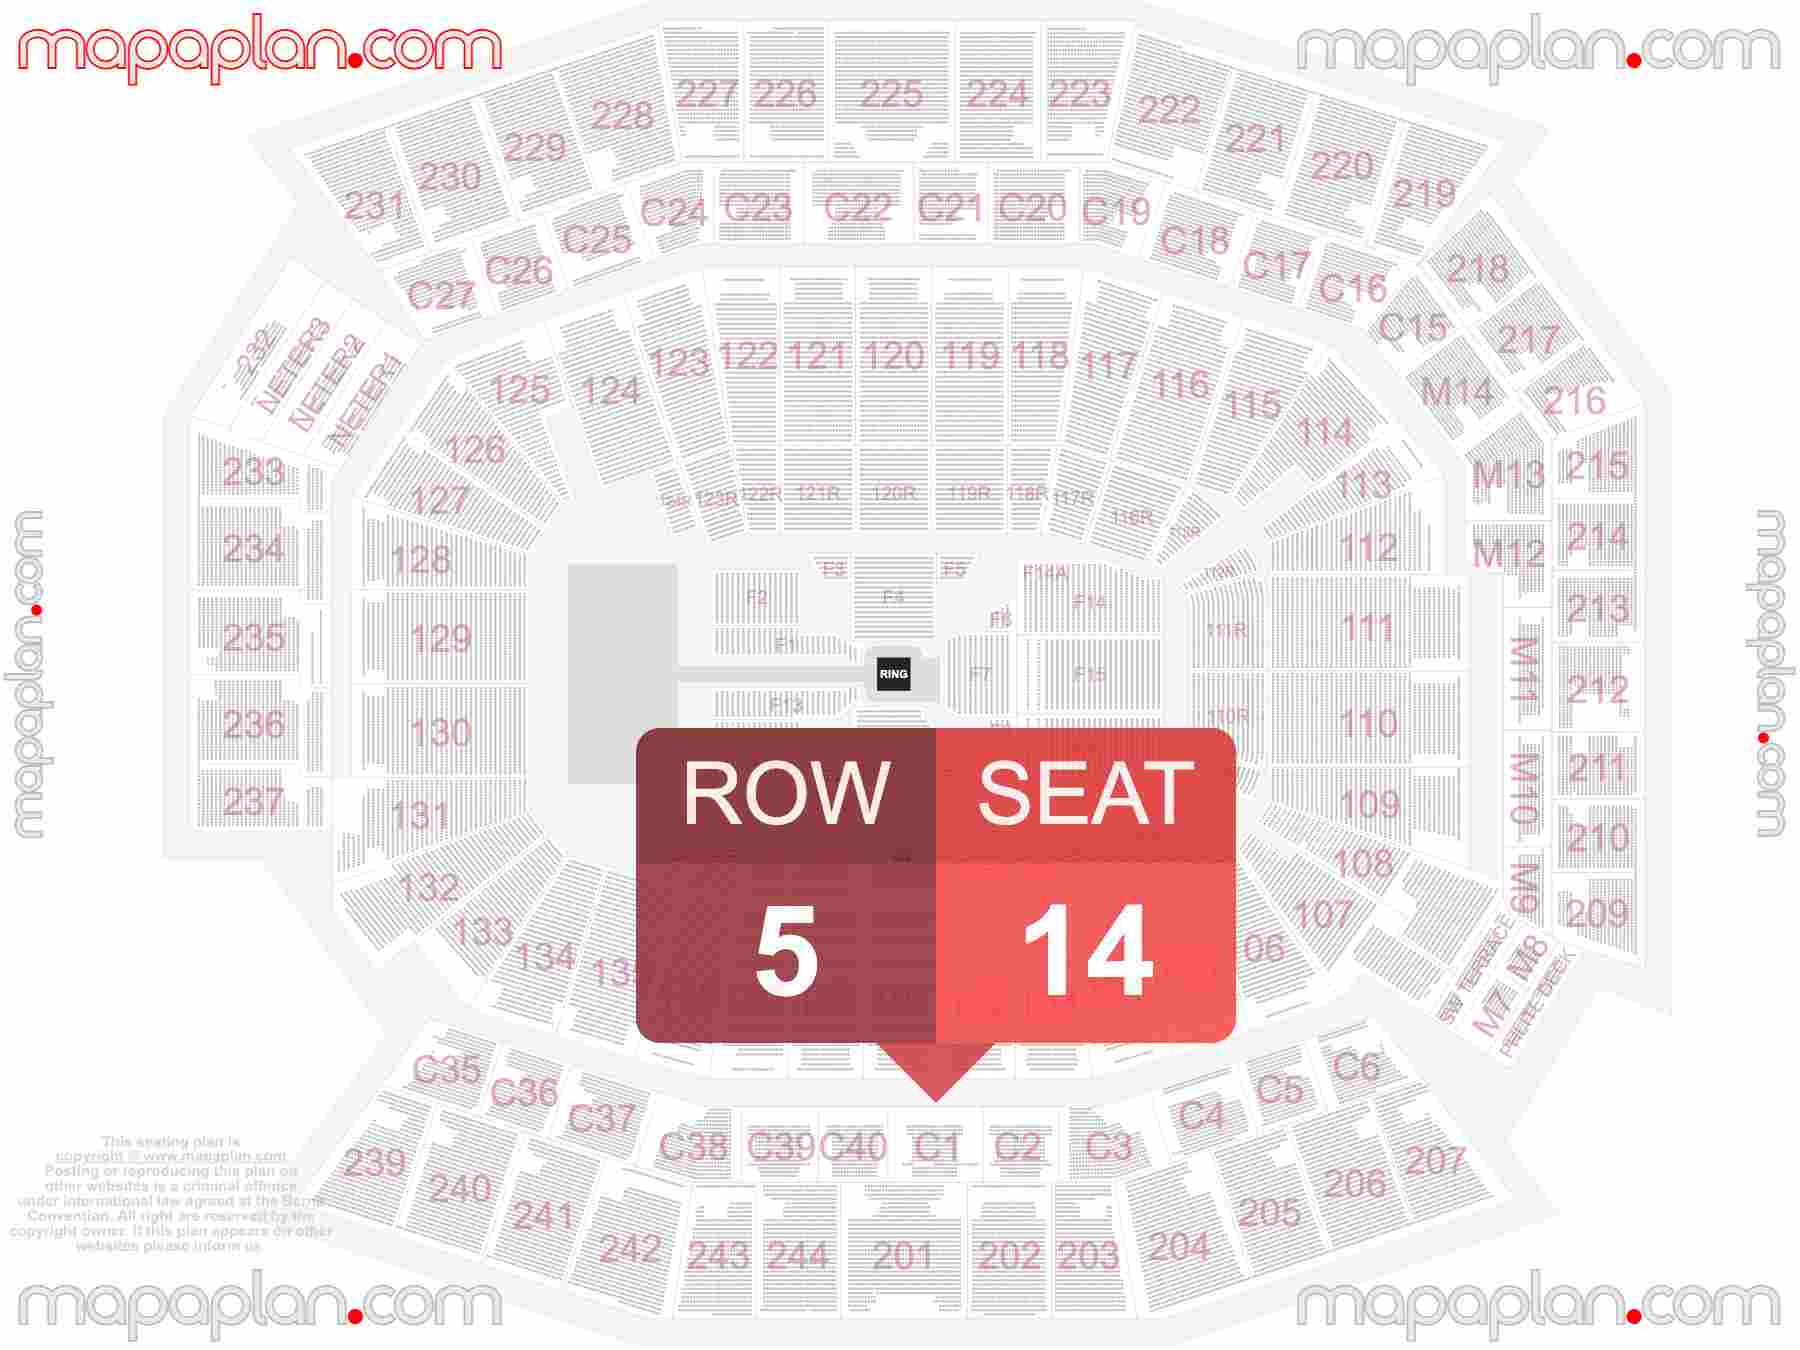 Philadelphia Lincoln Financial Field seating chart WWE wrestling, boxing seating plan - Interactive map to find best seat and row numbers